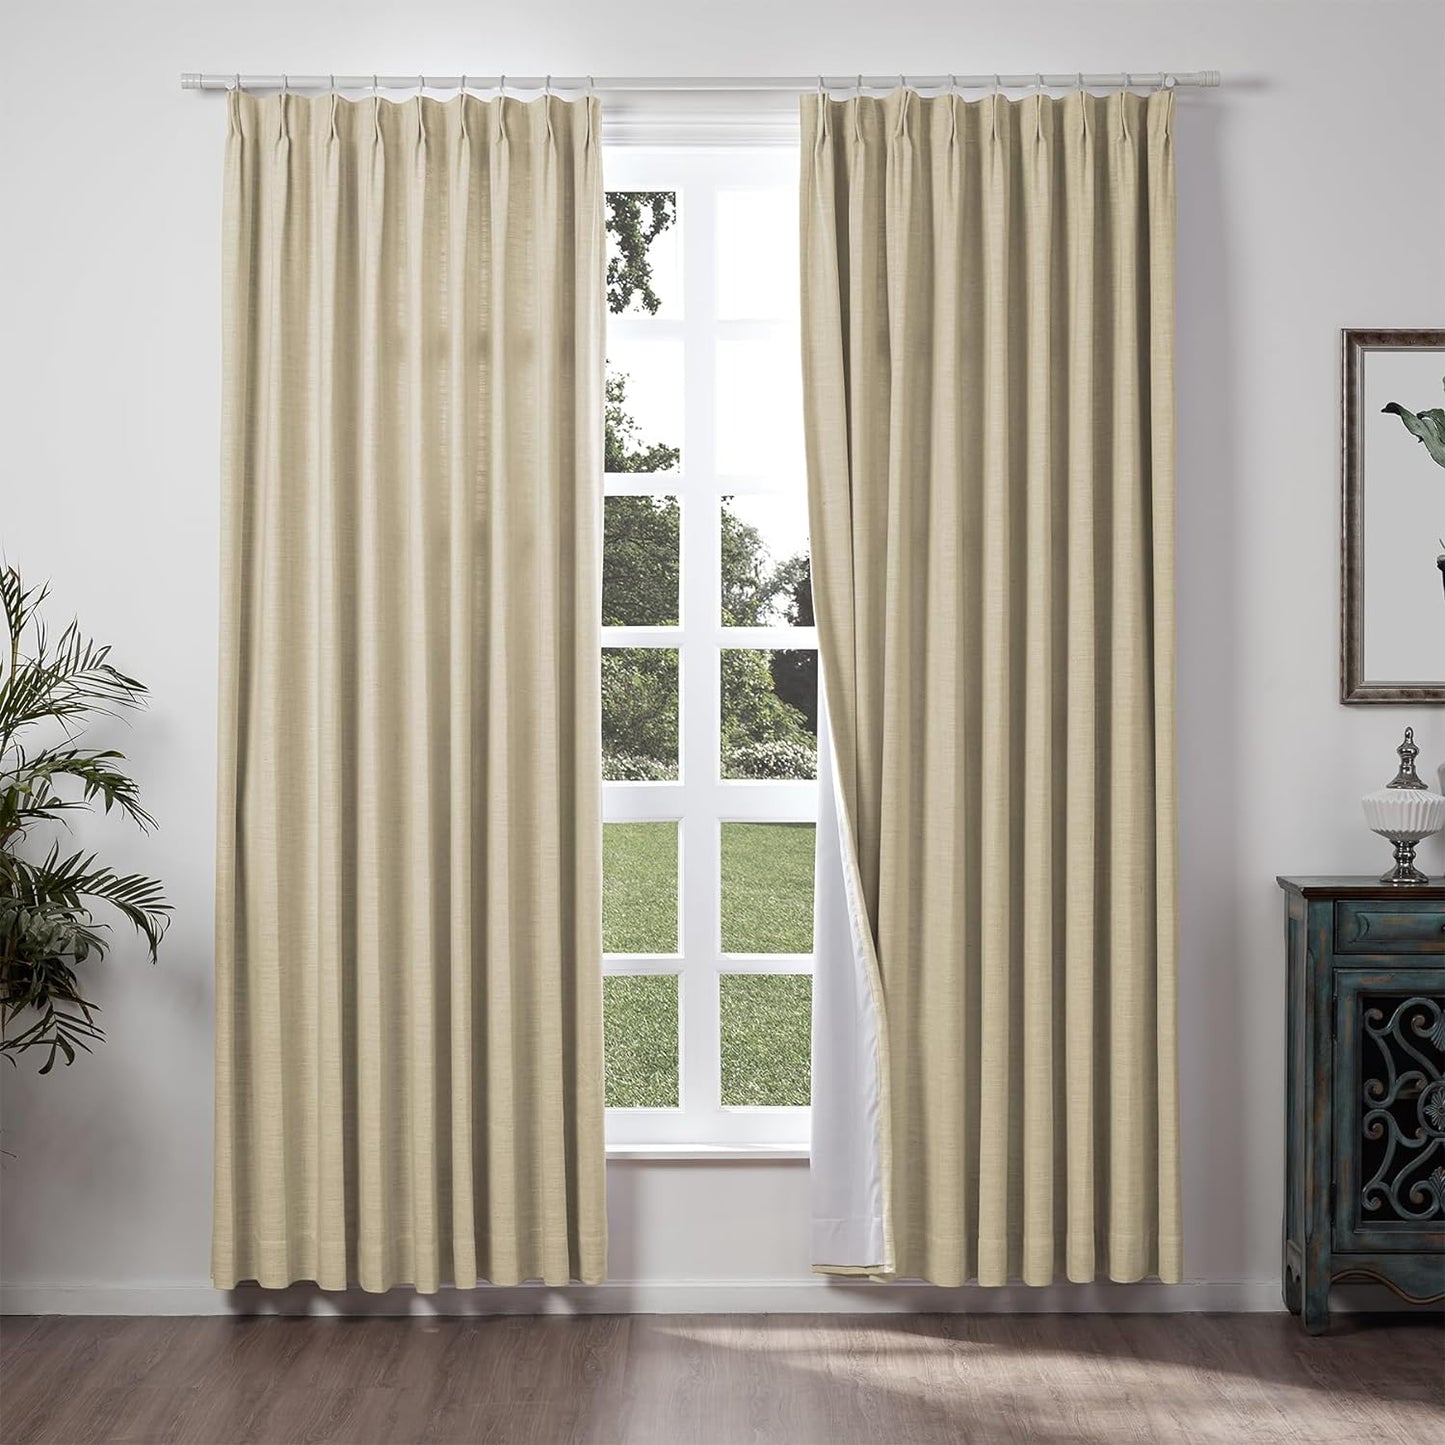 Chadmade 50" W X 84" L Polyester Linen Drape with Blackout Lining Pinch Pleat Curtain for Sliding Door Patio Door Living Room Bedroom, (1 Panel) Beige White Liz Collection  ChadMade Lt Khaki (4) 120Wx96L 